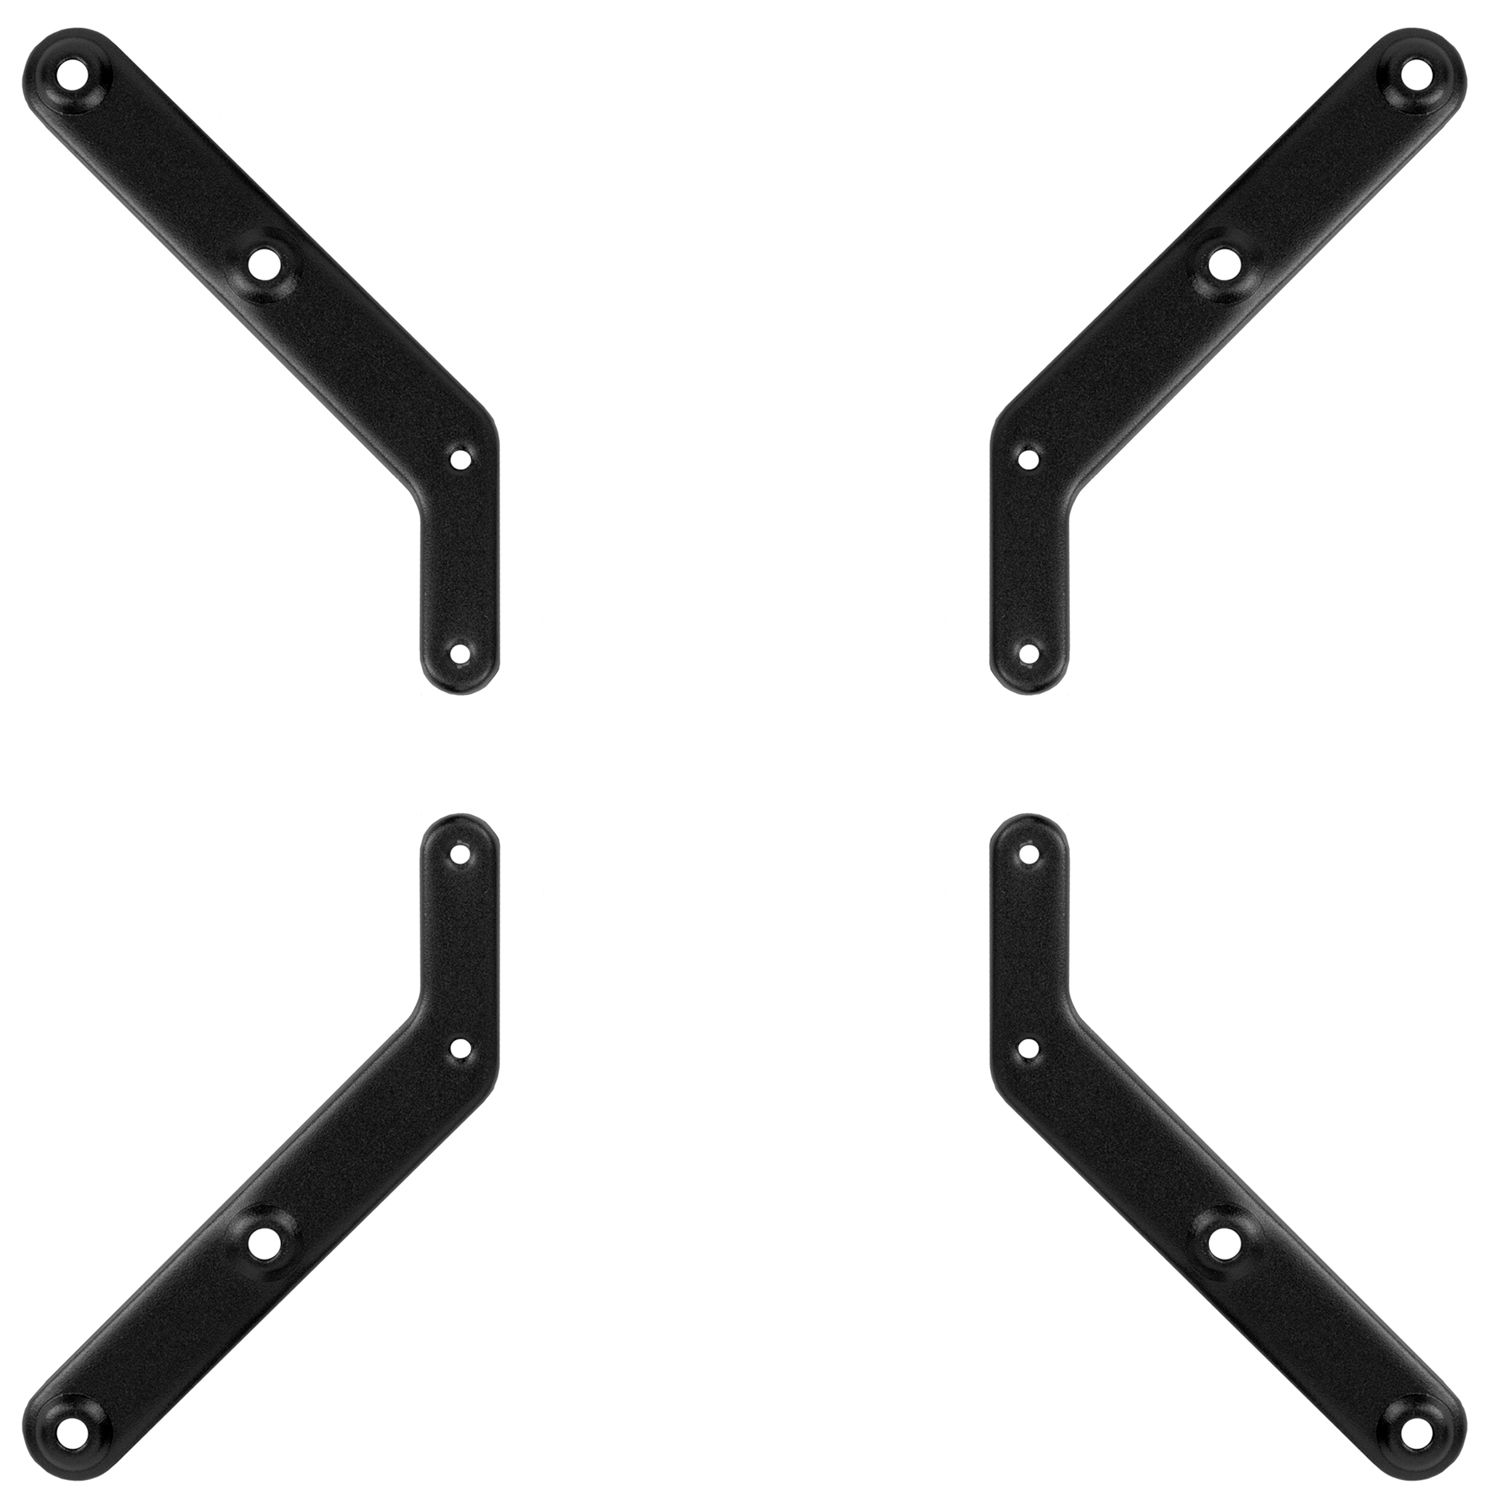 Mount-It! VESA Mount Adapter Kit for Monitor and TV Mount | Converts VESA 200x200mm to 300x300mm and 400x400mm - image 1 of 9